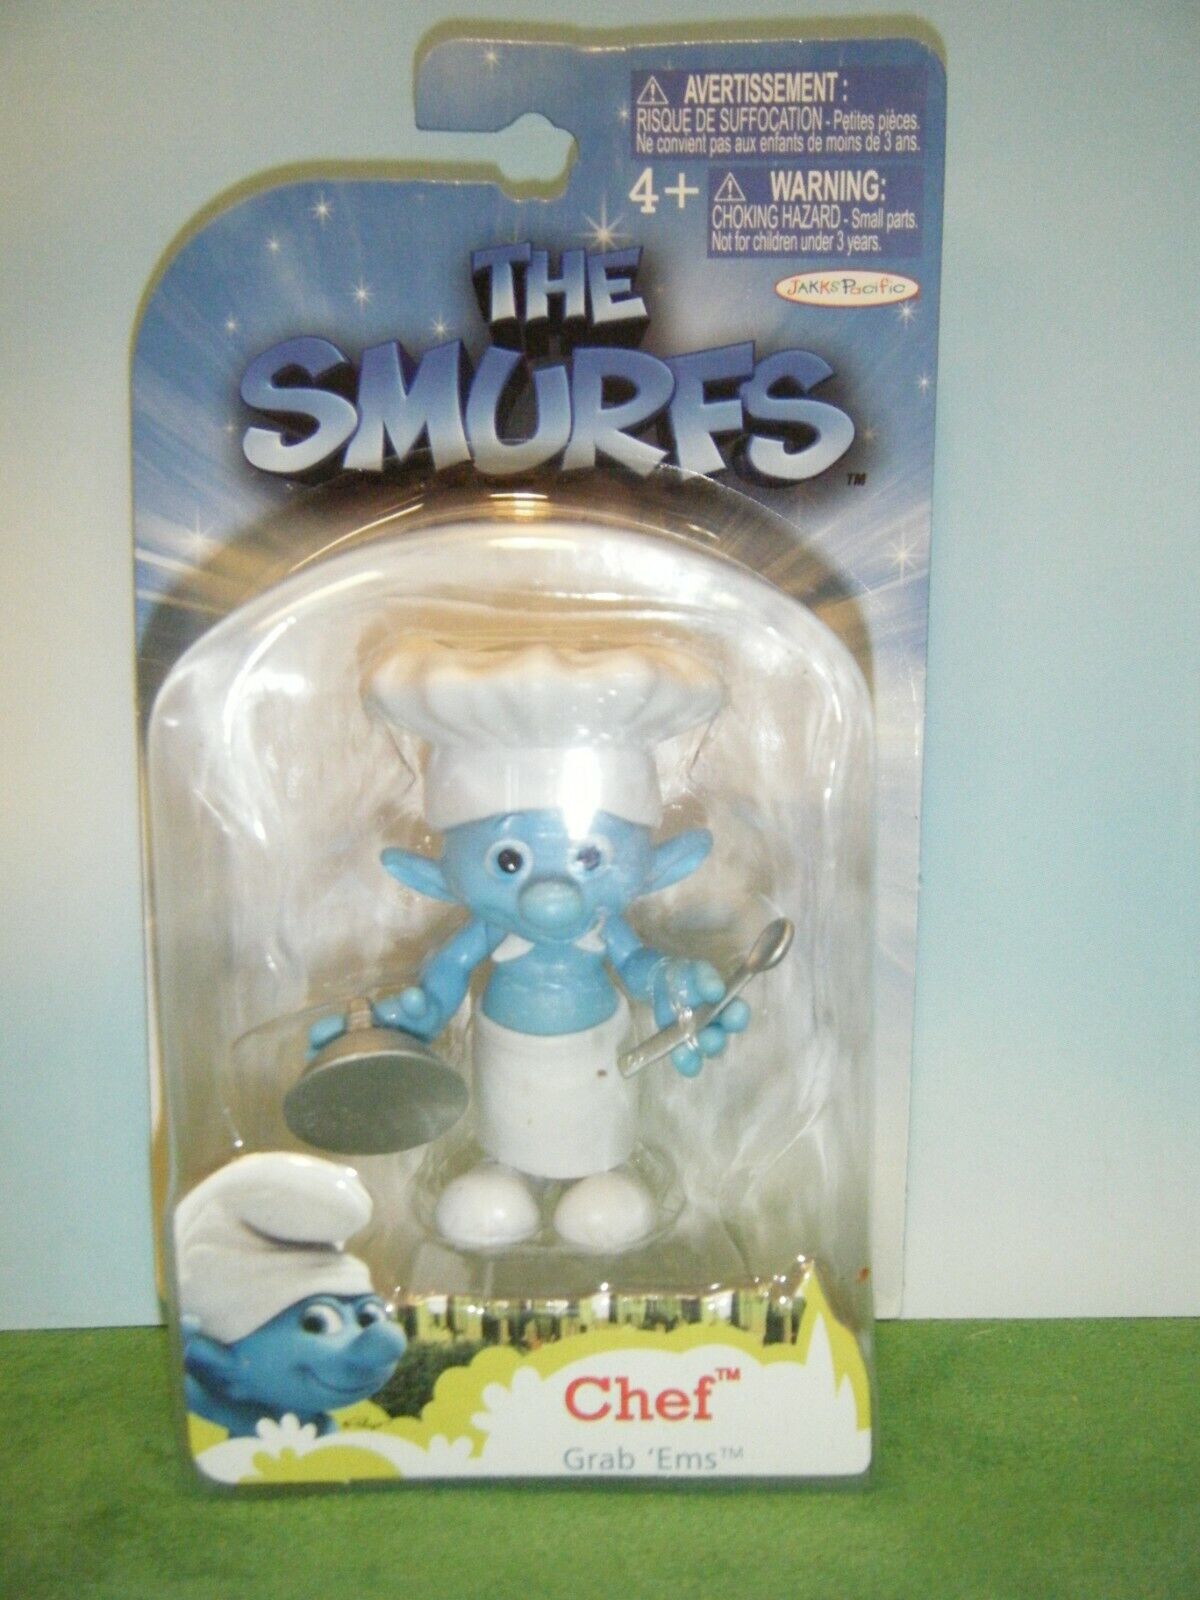 2011 SMURFS GRAB EMS CHEF FIGURE *NEW* IN PACKAGE